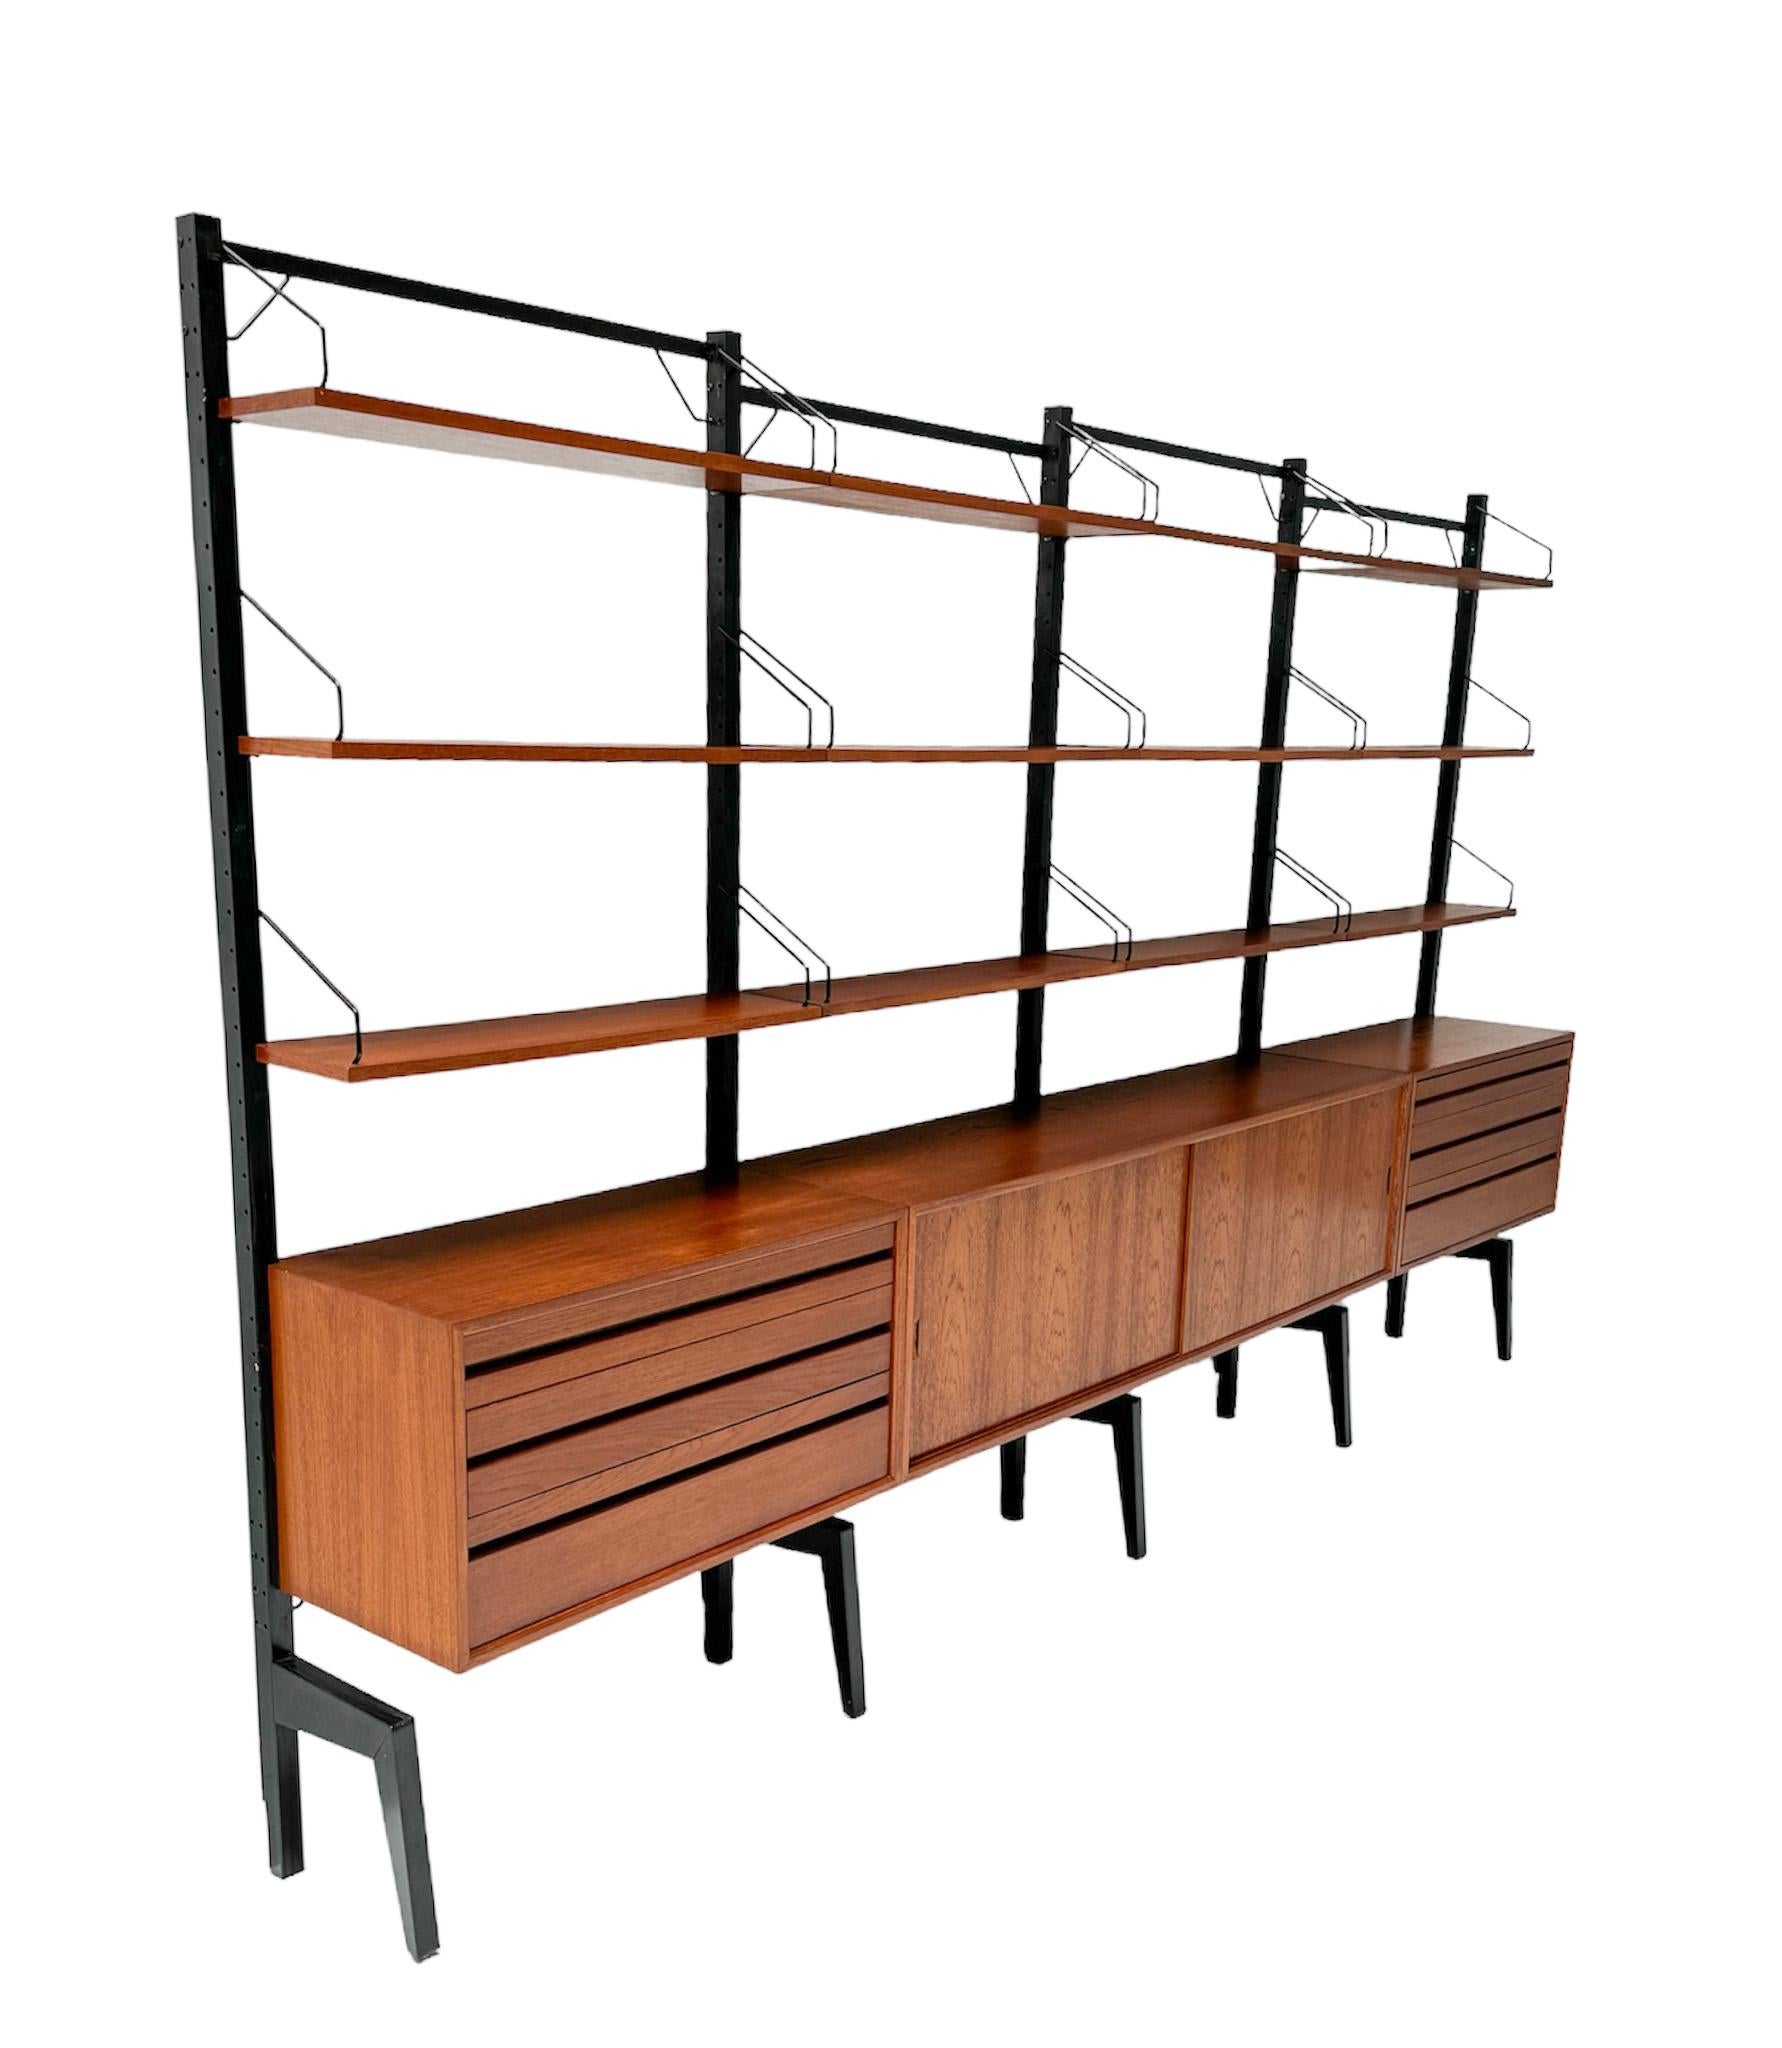 Magnificent and extra large Mid-Century Modern Royal modular free standing wall unit.
Design by Poul Cadovius for Cado.
Striking Danish design from the 1960s.
This extra large Mid-Century Modern Royal wall unit consists of:
five black lacquered